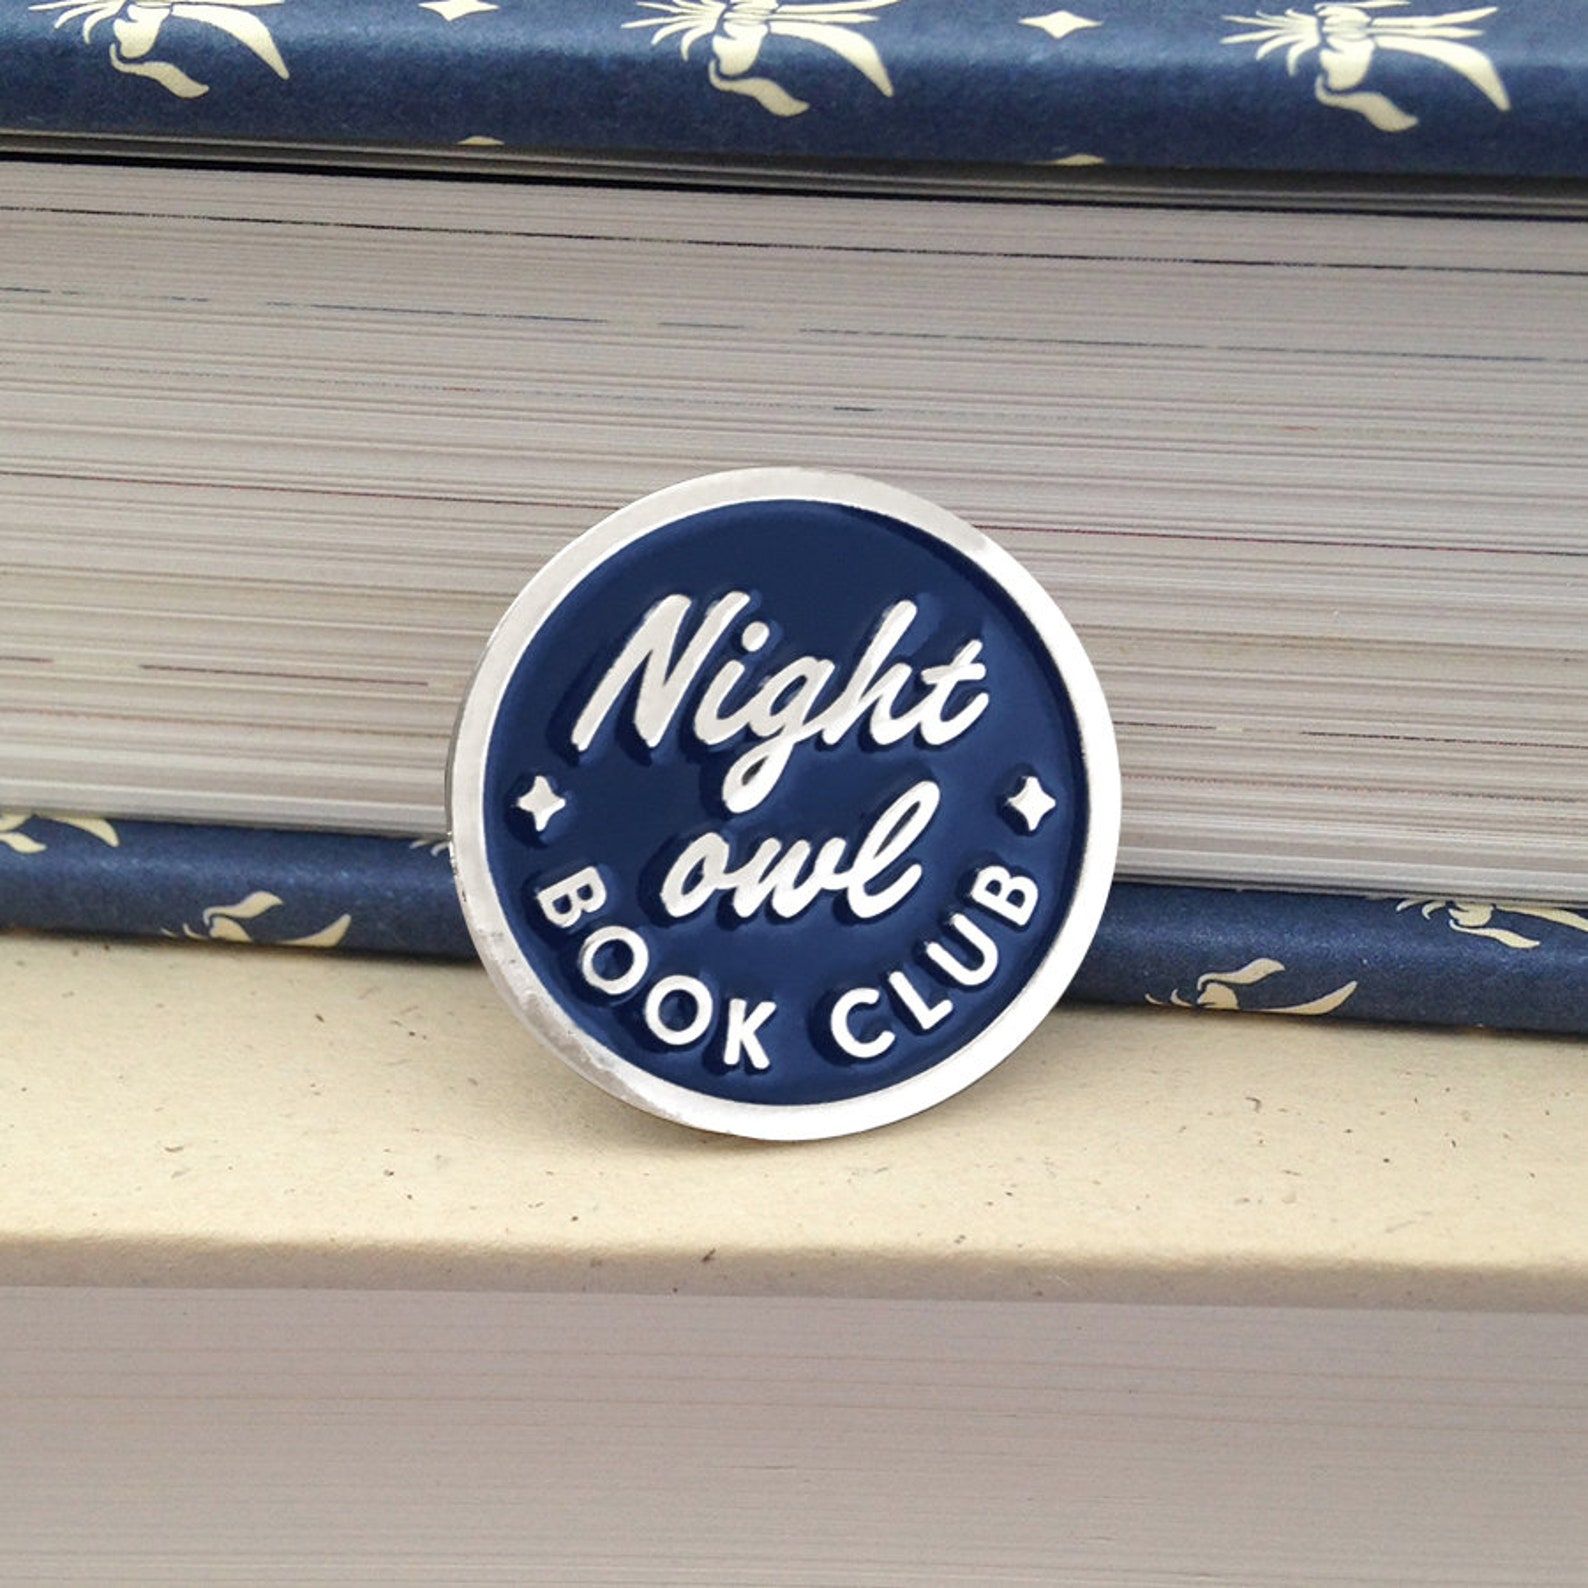 A round blue and solver enamel pin that reads "Night owl book club"